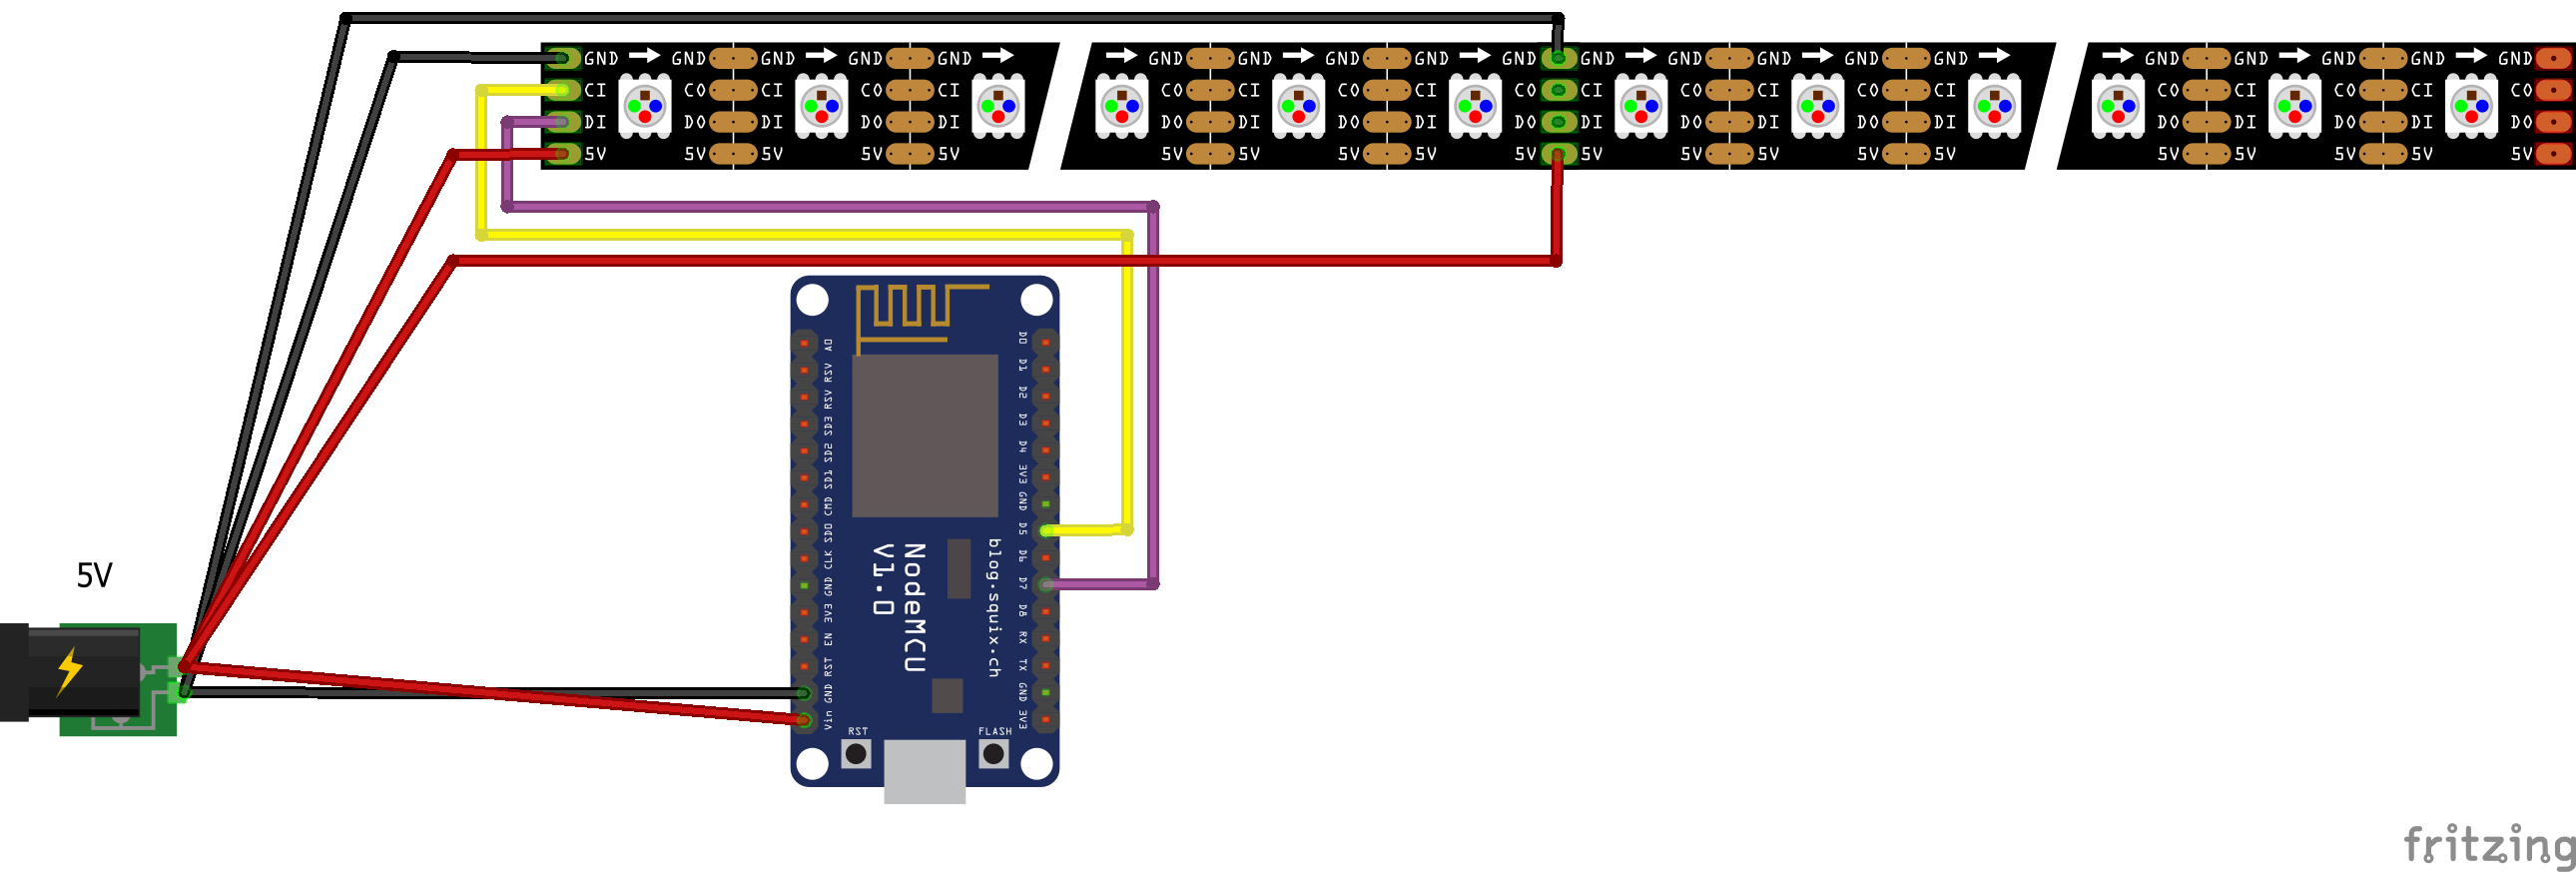 afskaffet Foragt Pil ESP8266 LED Strip Driver (APA102/WS2811) Working with HASSIO - Hackster.io